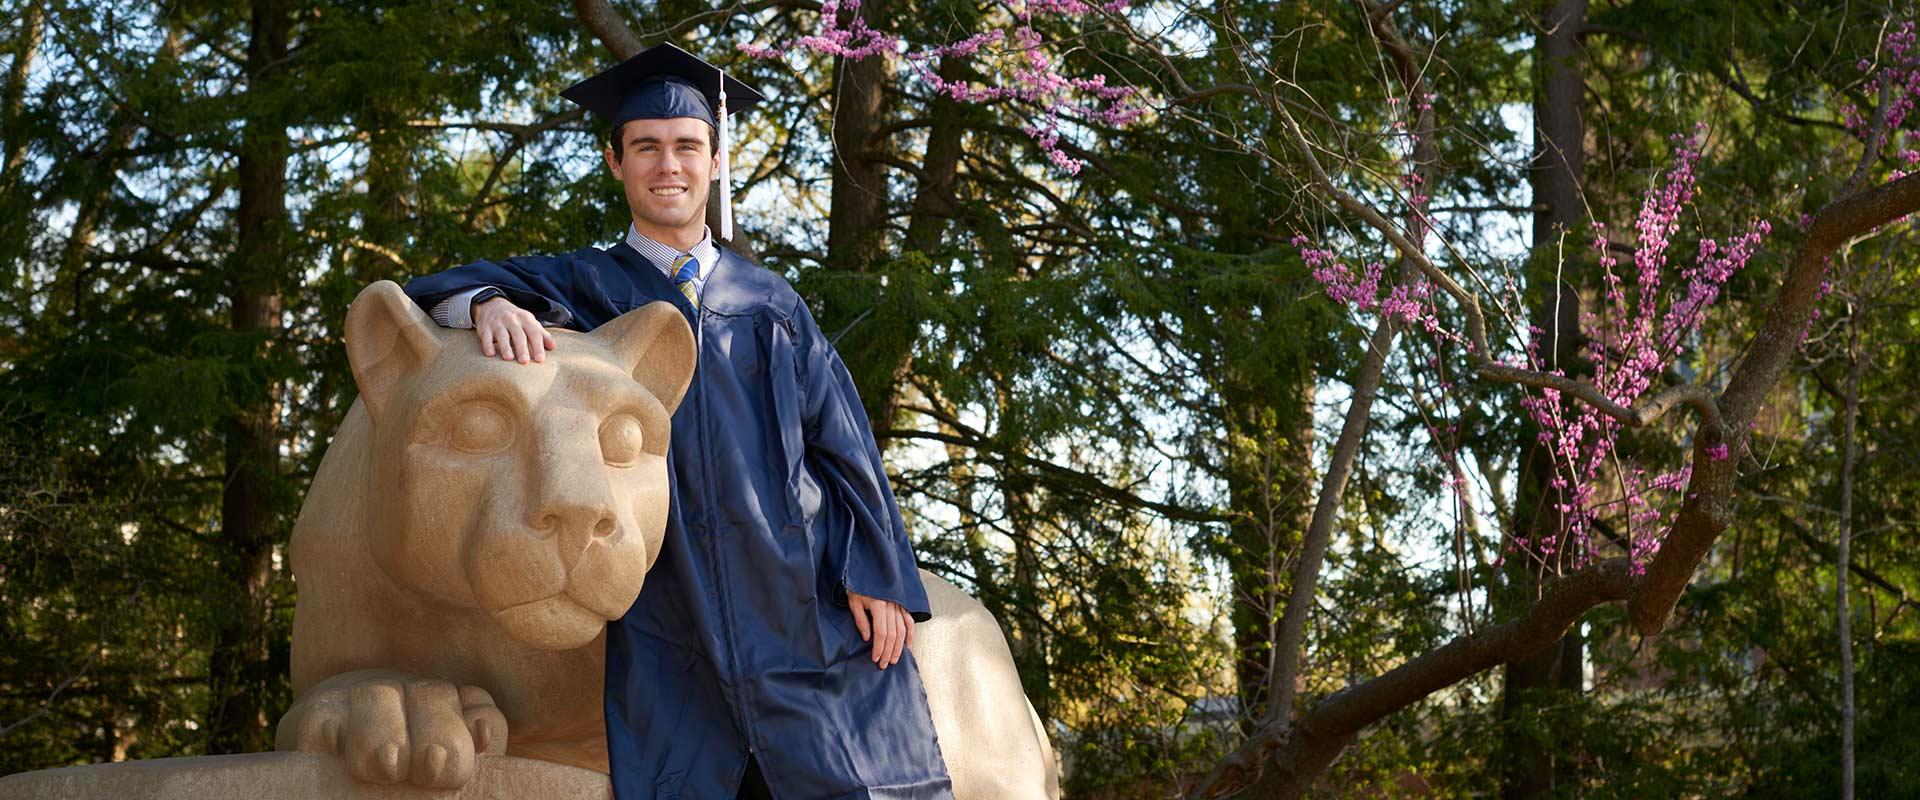 graduate poses with the Nittany Lion shrine